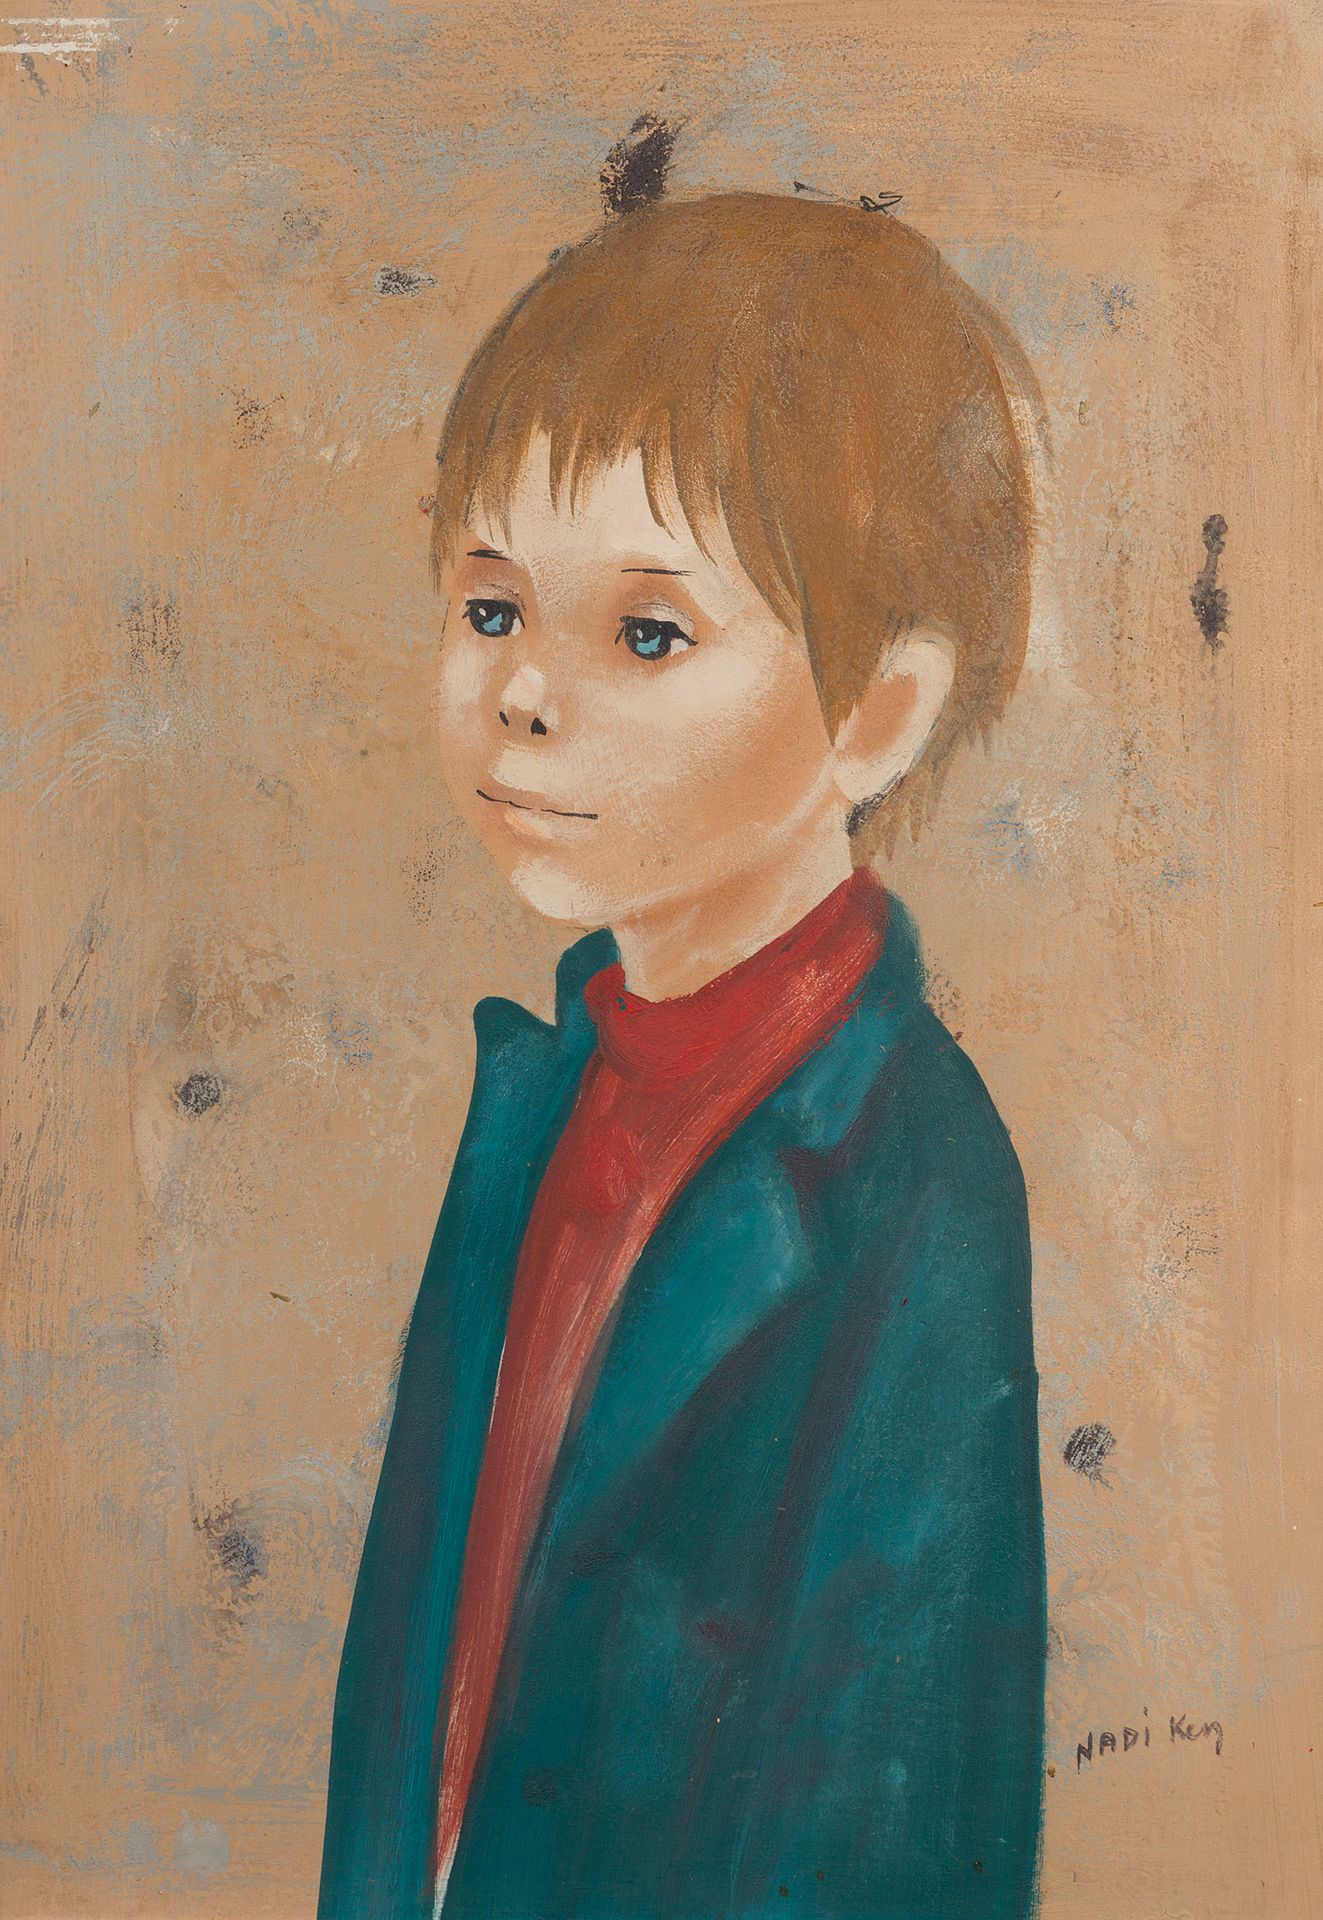 Null Nadi KEN (born in 1934)

Portrait of a child

Oil on panel signed

52,5 x 3&hellip;